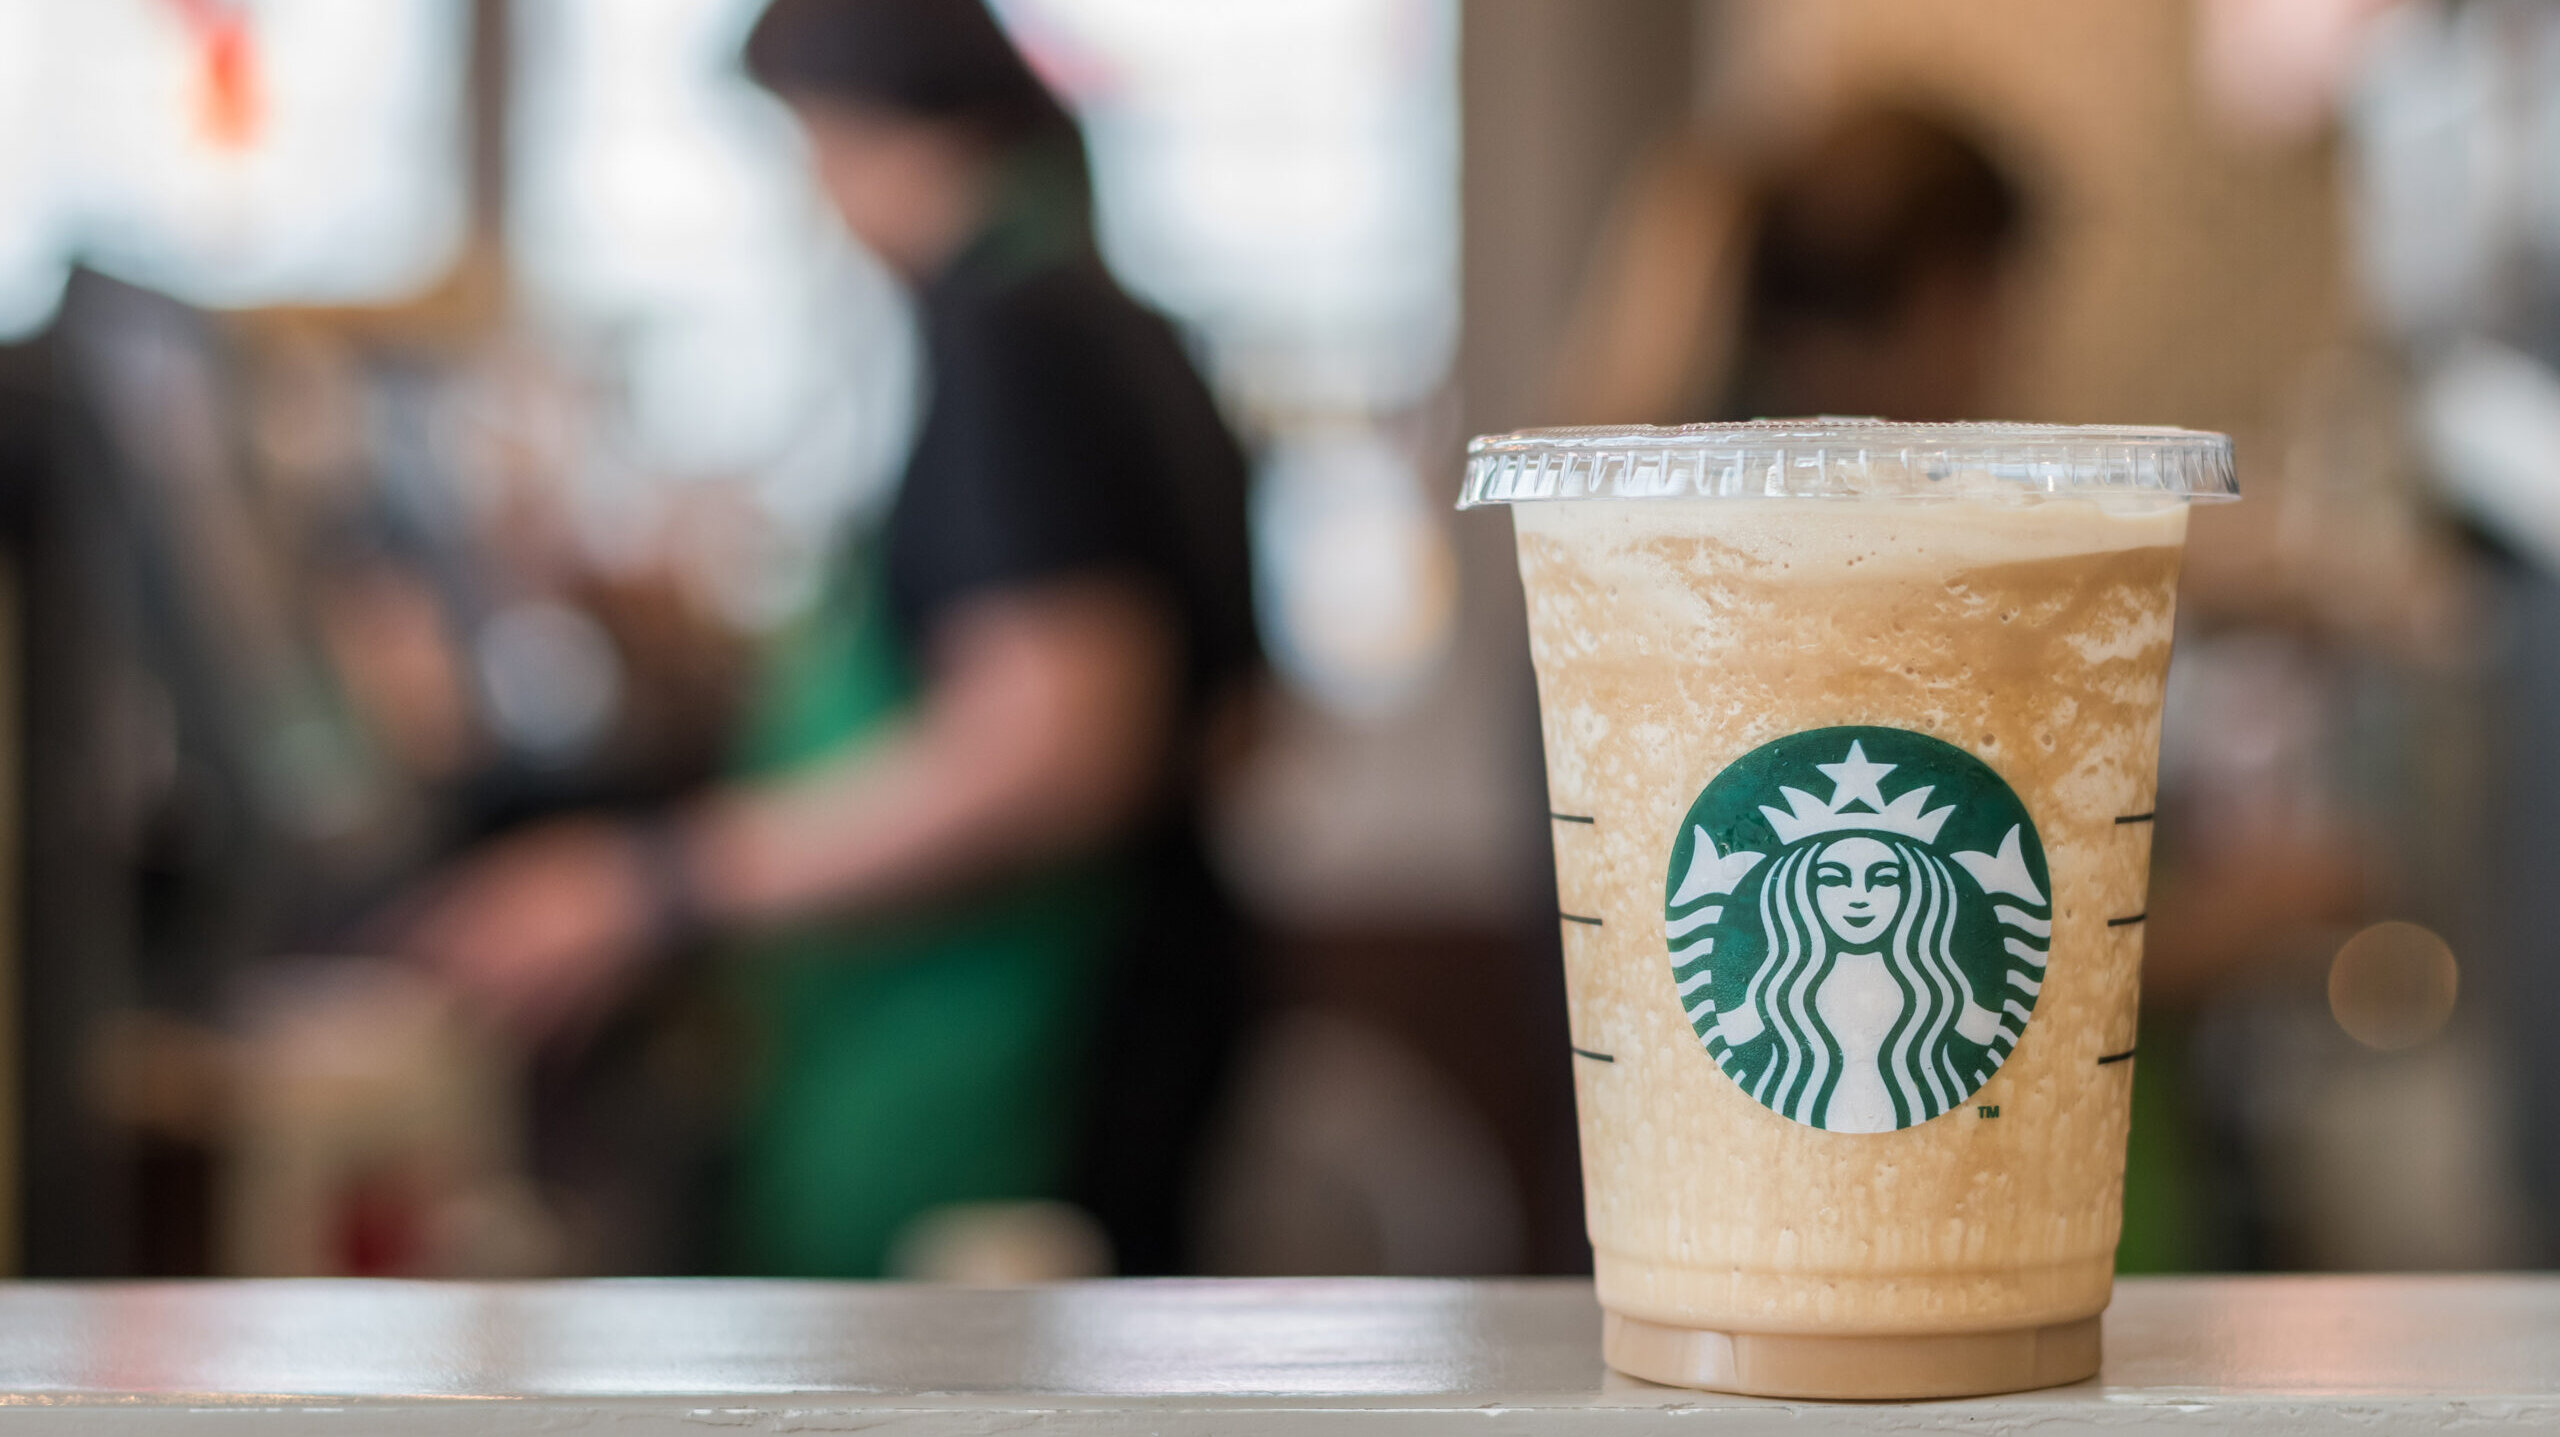 Get 50% off drinks at Starbucks today